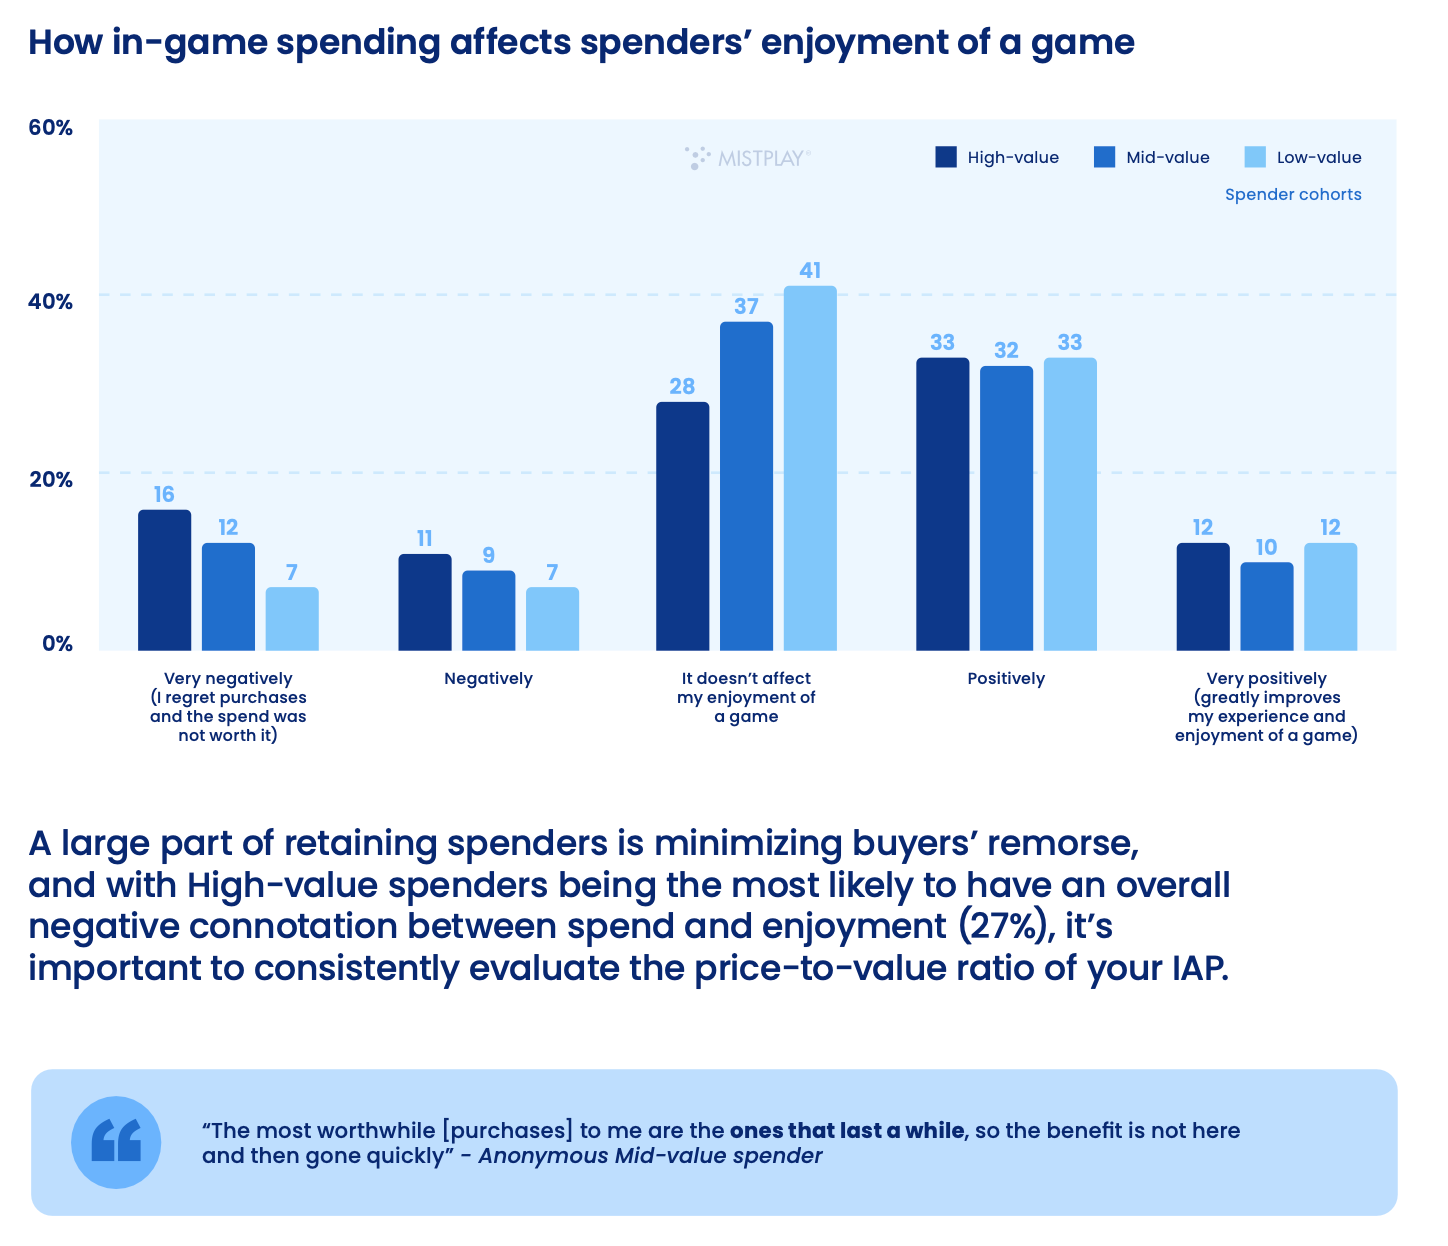 How in-game spending affects enjoyment of a game